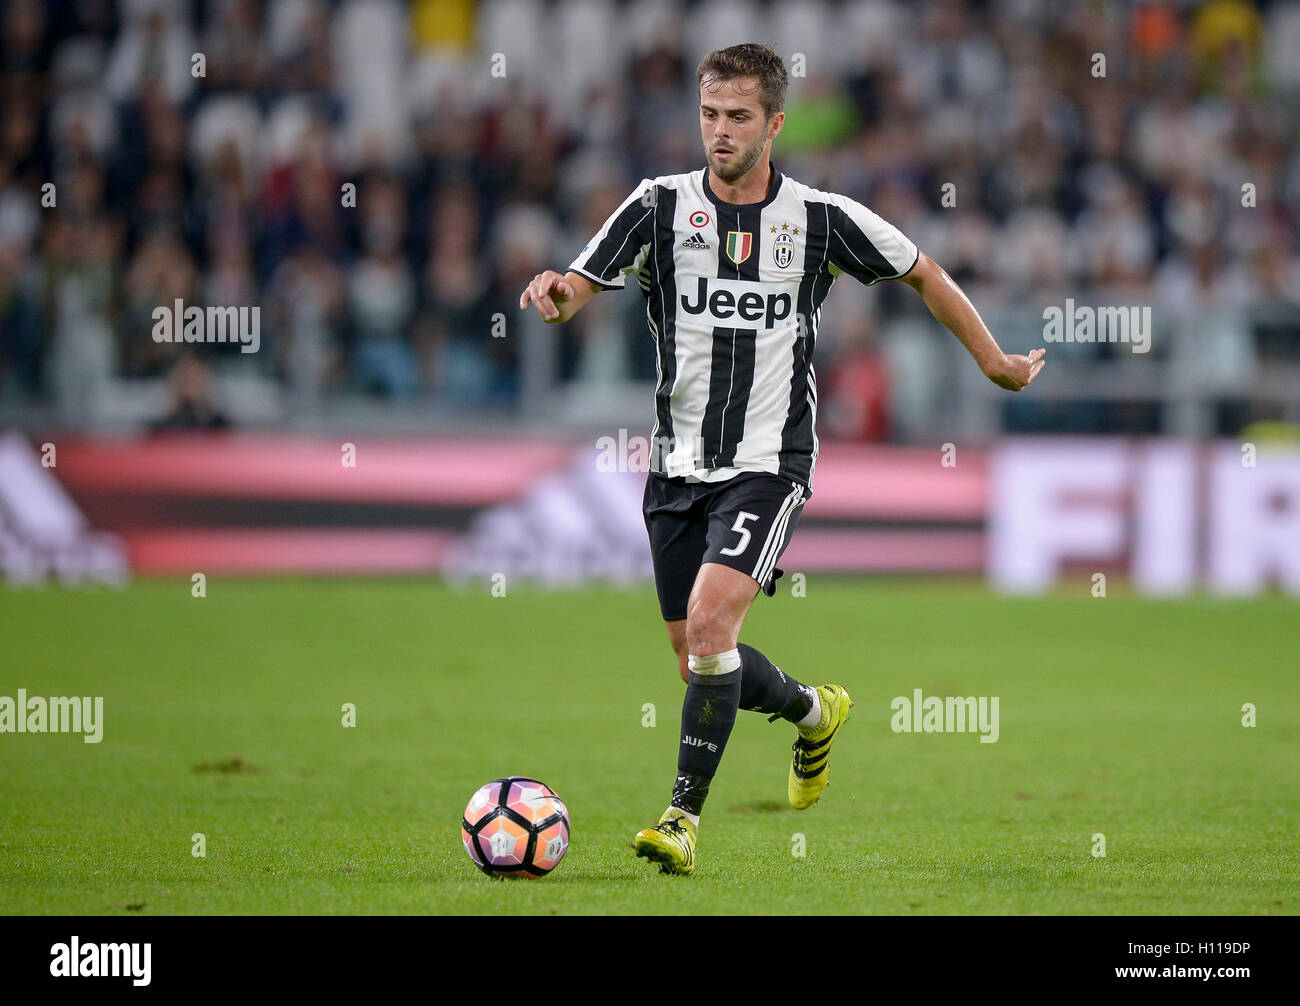 Turin, Italy. 21st Sep, 2016. Miralem Pjanic of Juventus FC in action  during the Serie A football match between Juventus FC and Cagliari Calcio.  Juventus FC wins 4-0 over Cagliari Calcio. ©